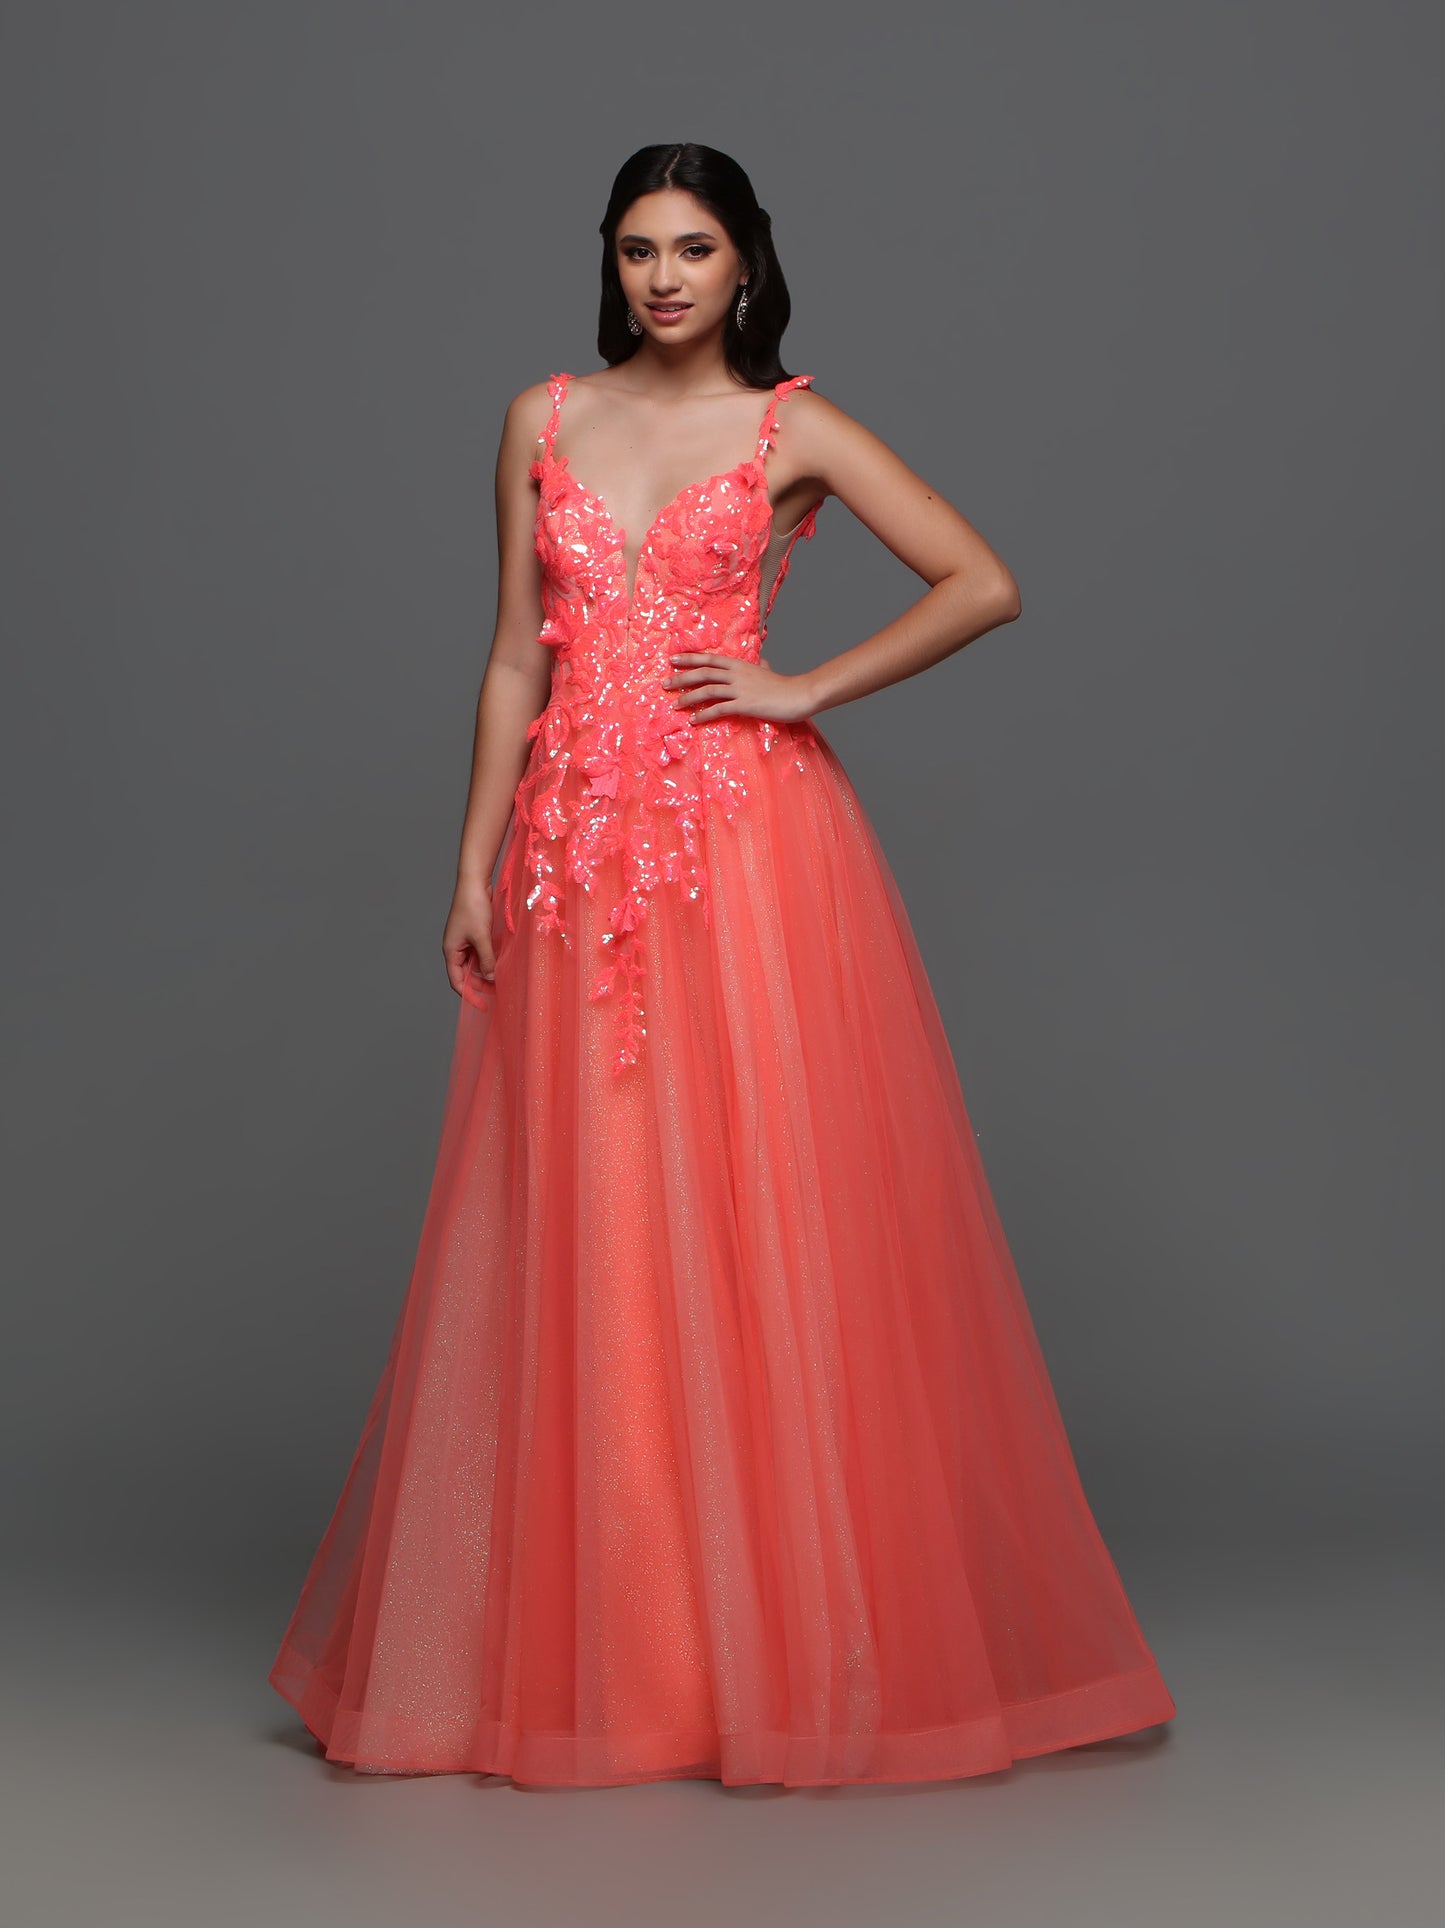 Elevate your formal look with the Candice Wang 72388 Long Shimmer Sequin Ballgown Prom Dress. The A-line silhouette and Glitter tulle details are complemented by the shimmering sequin lace, giving you an undeniable sparkle. Make a statement at your next event with this elegant and stylish dress.  Sizes: 0-20  Colors: Coral 